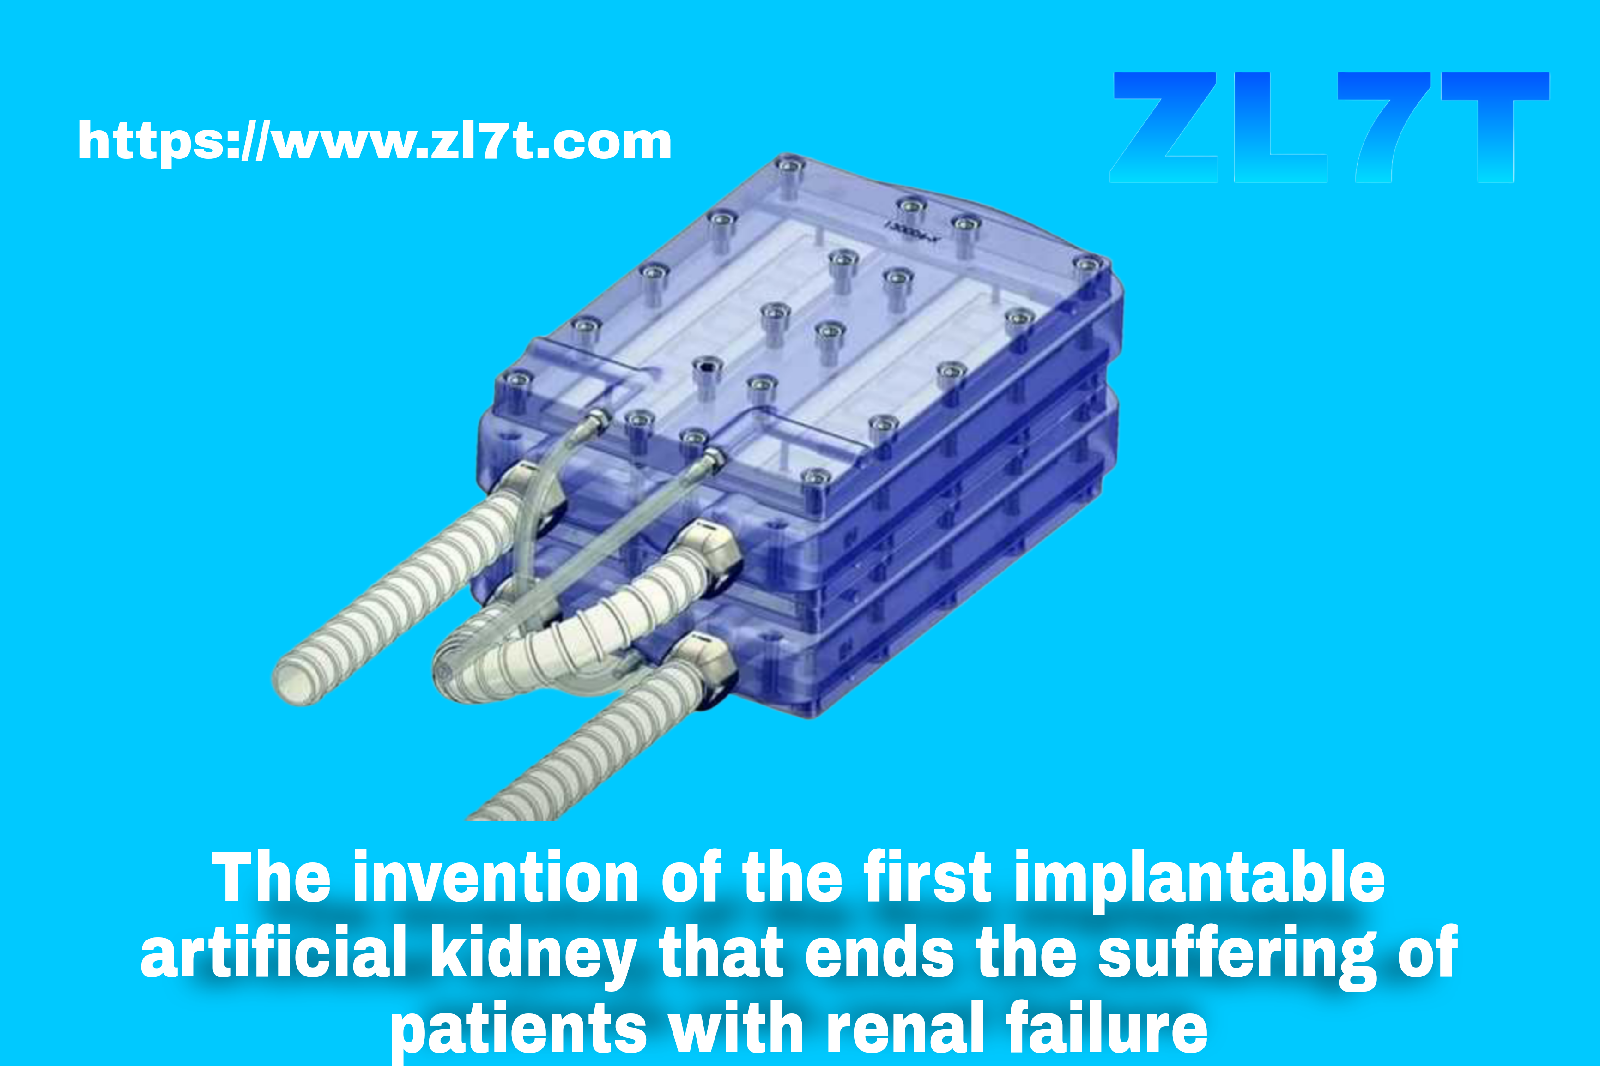 The invention of the first implantable artificial kidney that ends the suffering of patients with renal failure